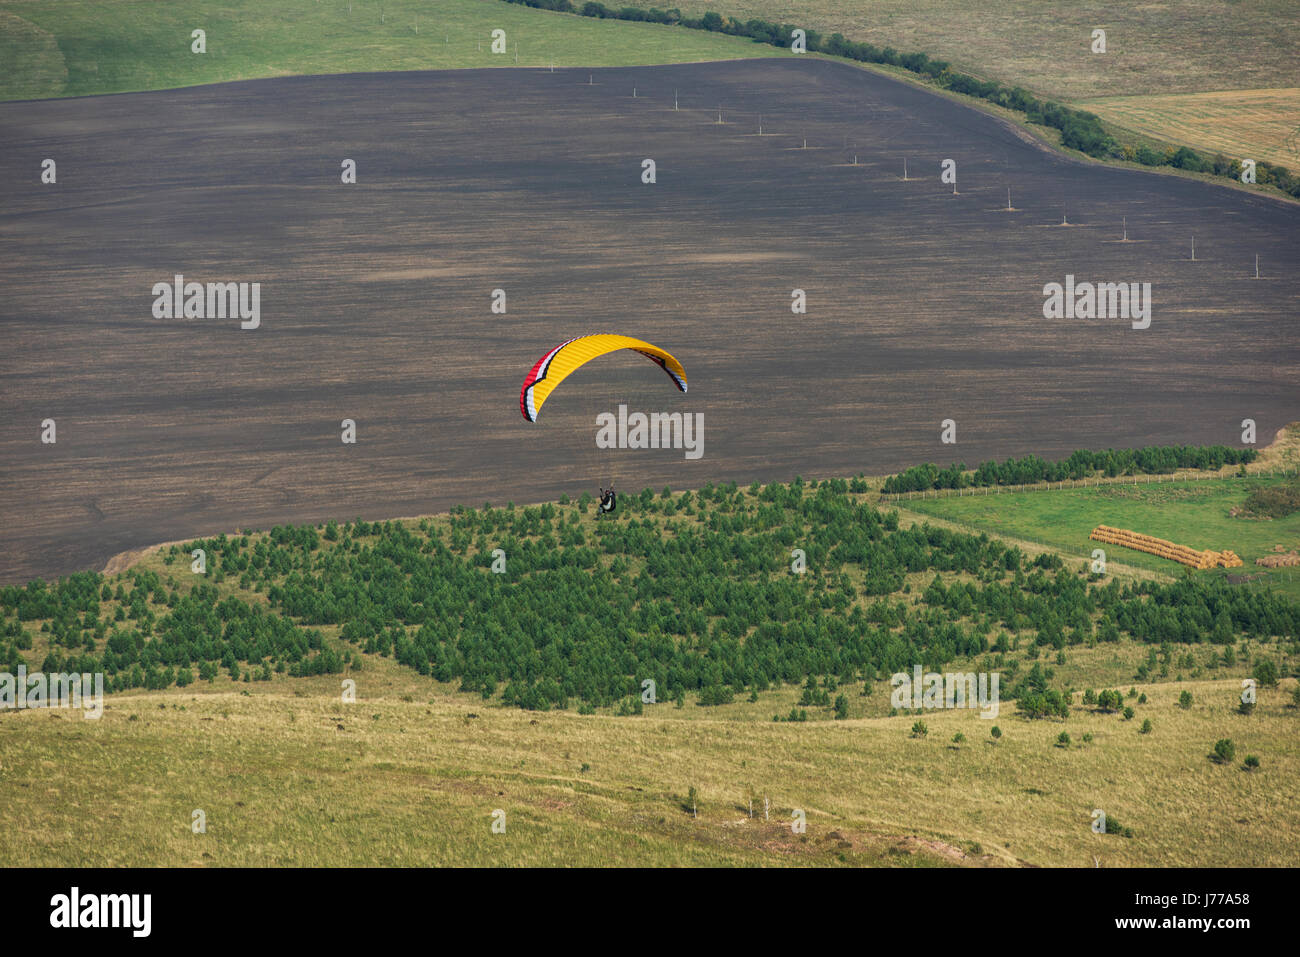 Paragliding in mountains Stock Photo